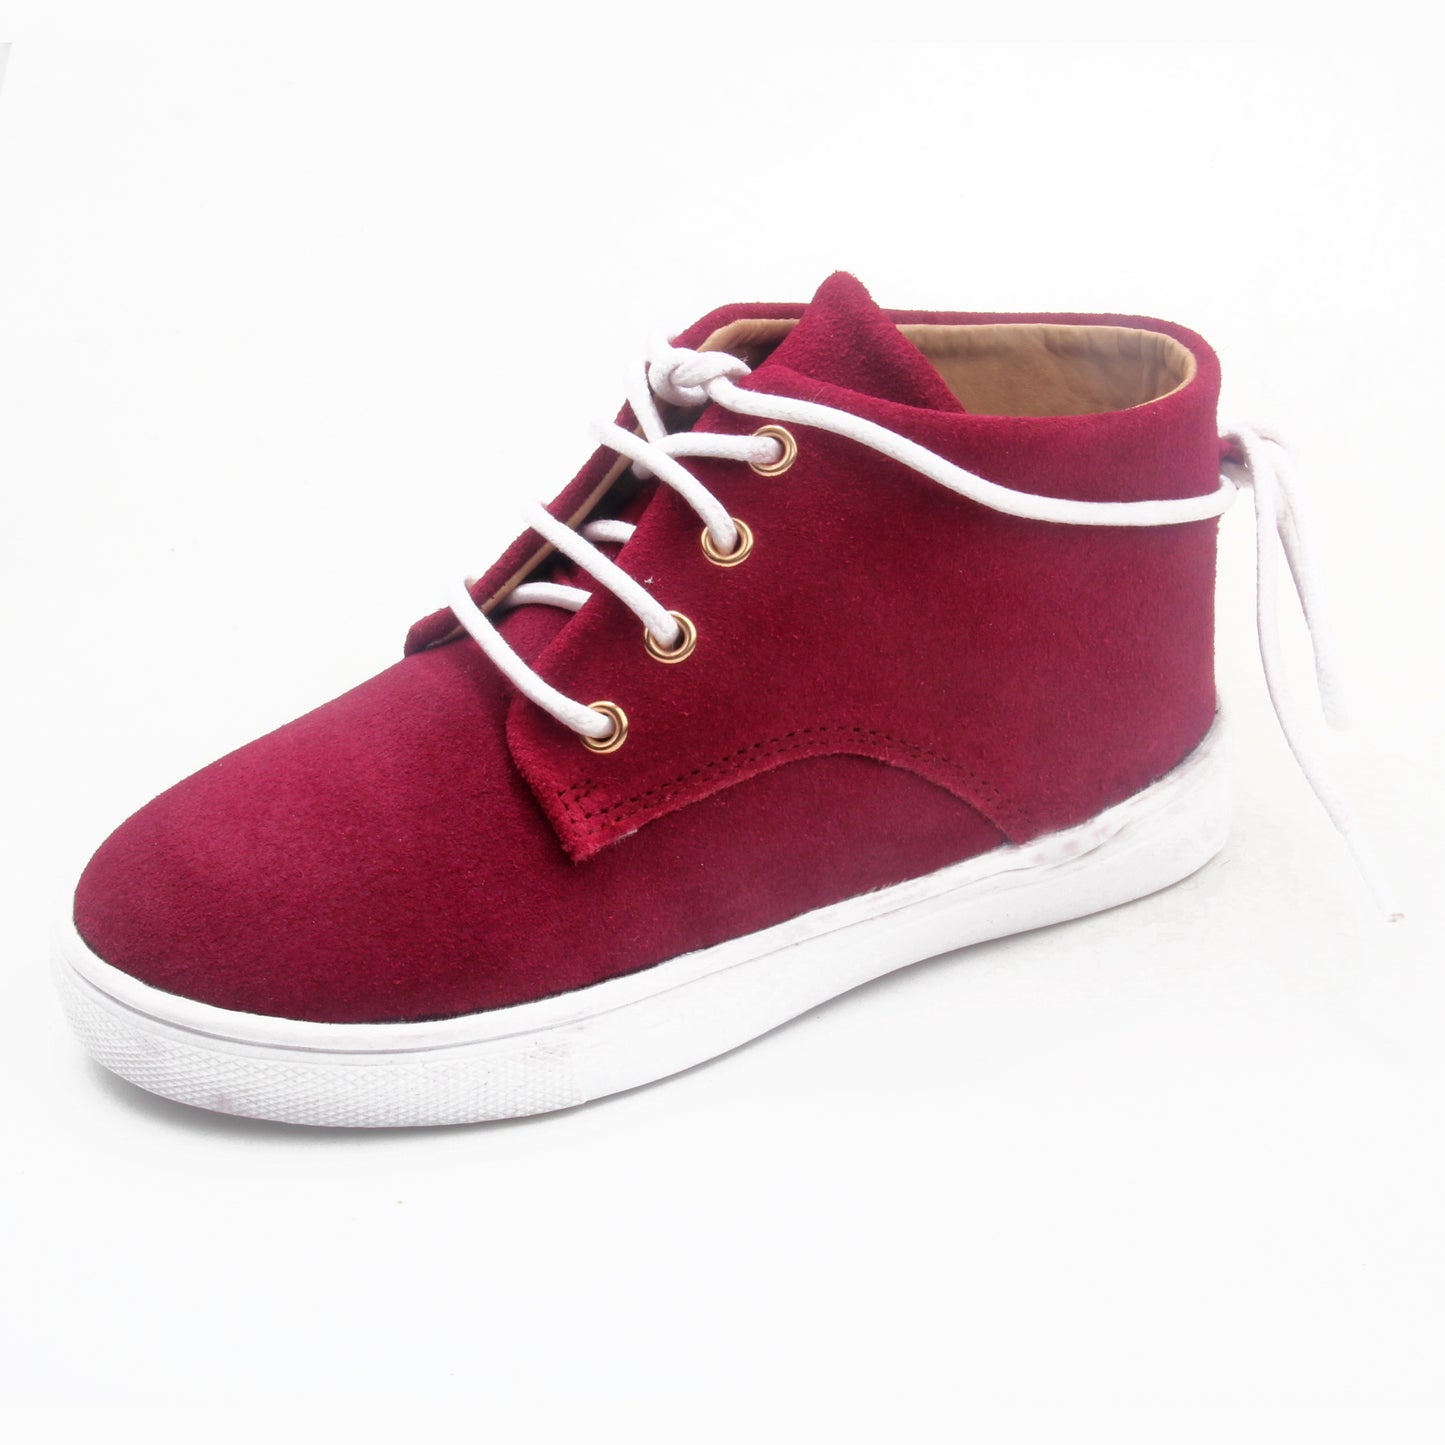 WILD CHASE - Maroon | Gelato Suede Leather Sneaker